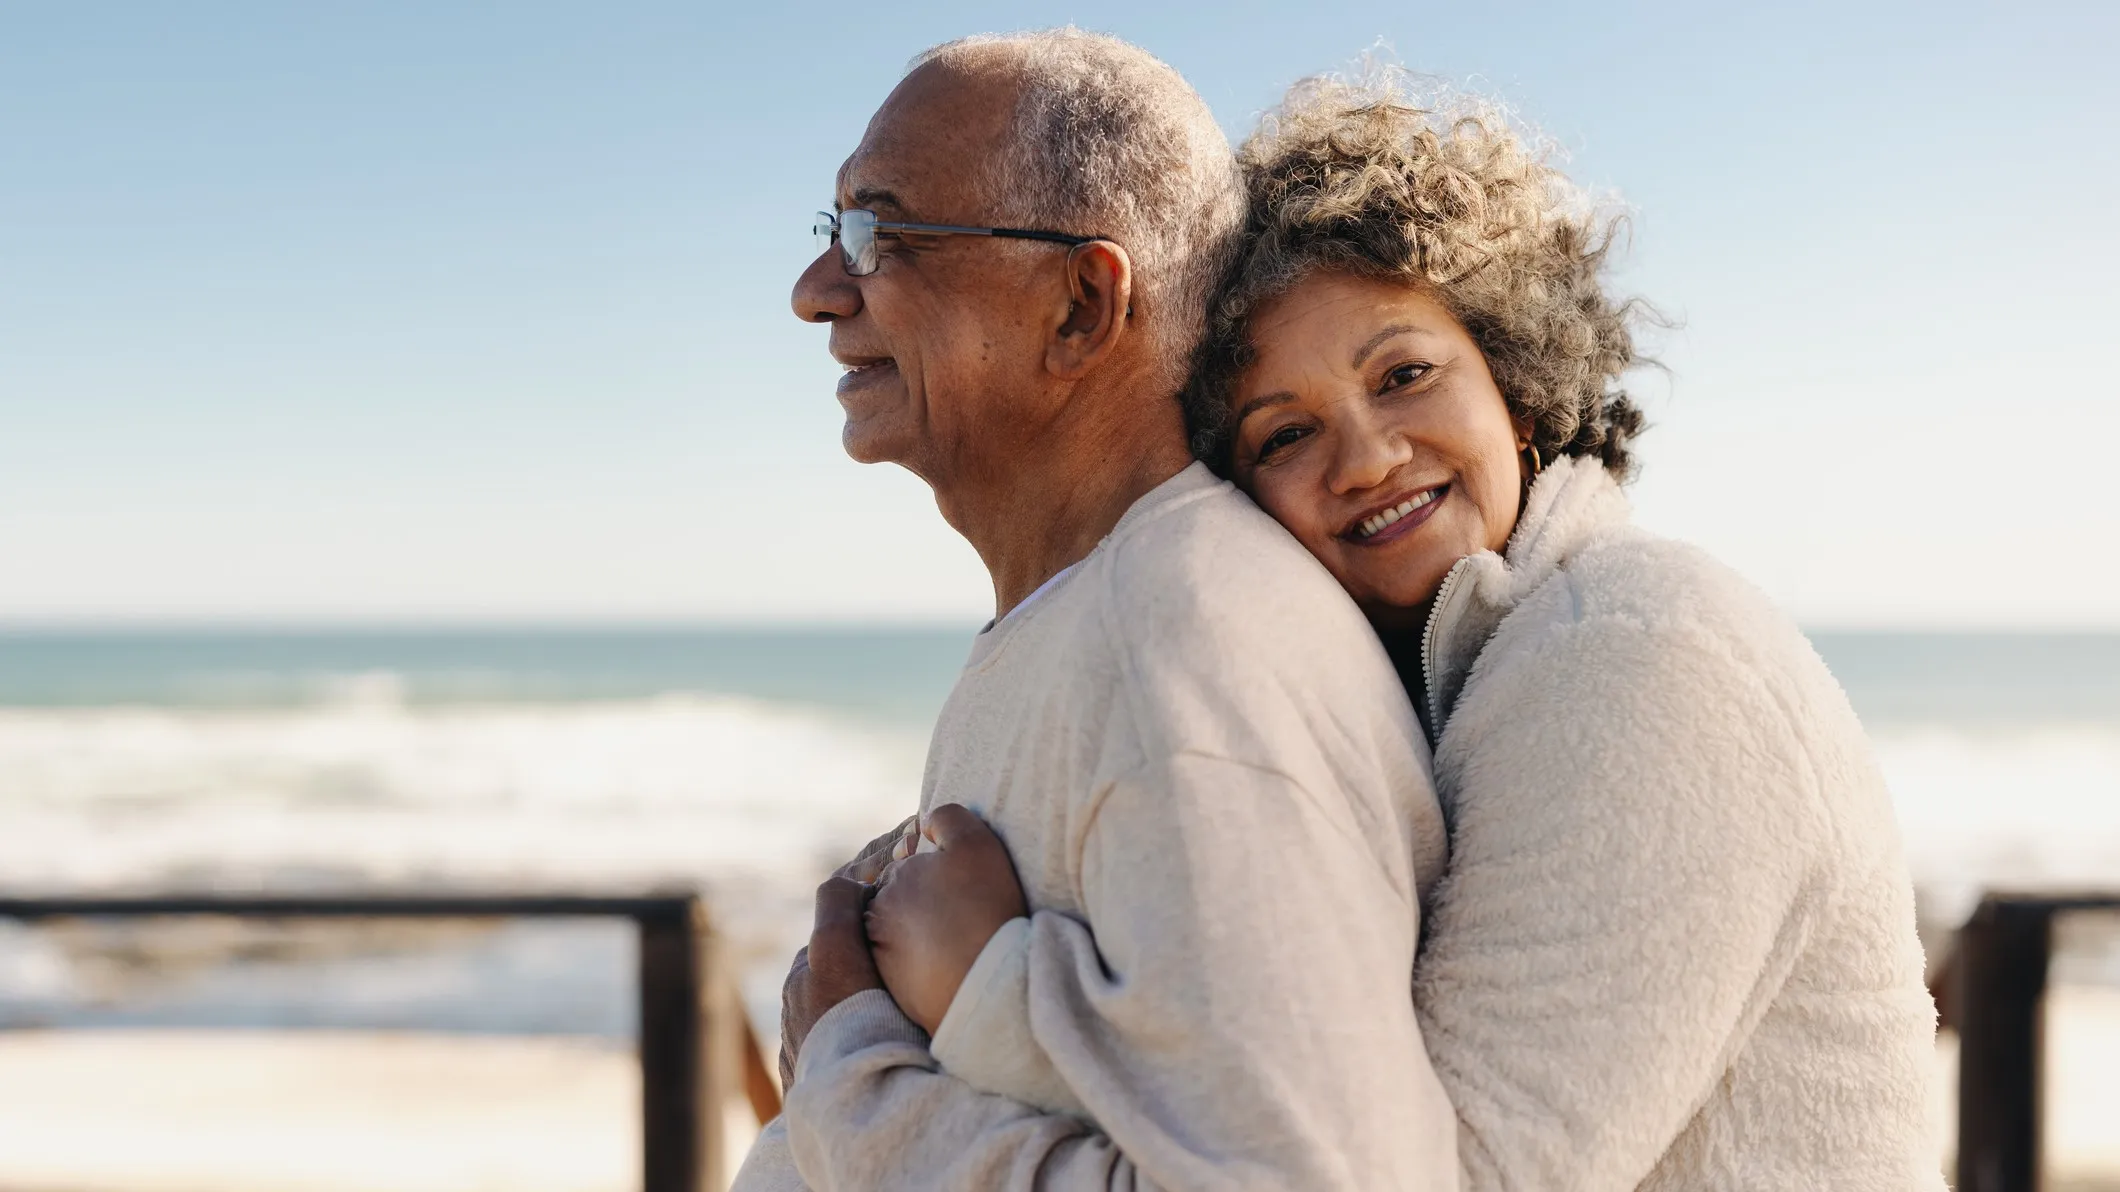 Romantic senior woman smiling at the camera while embracing her husband by the ocean.